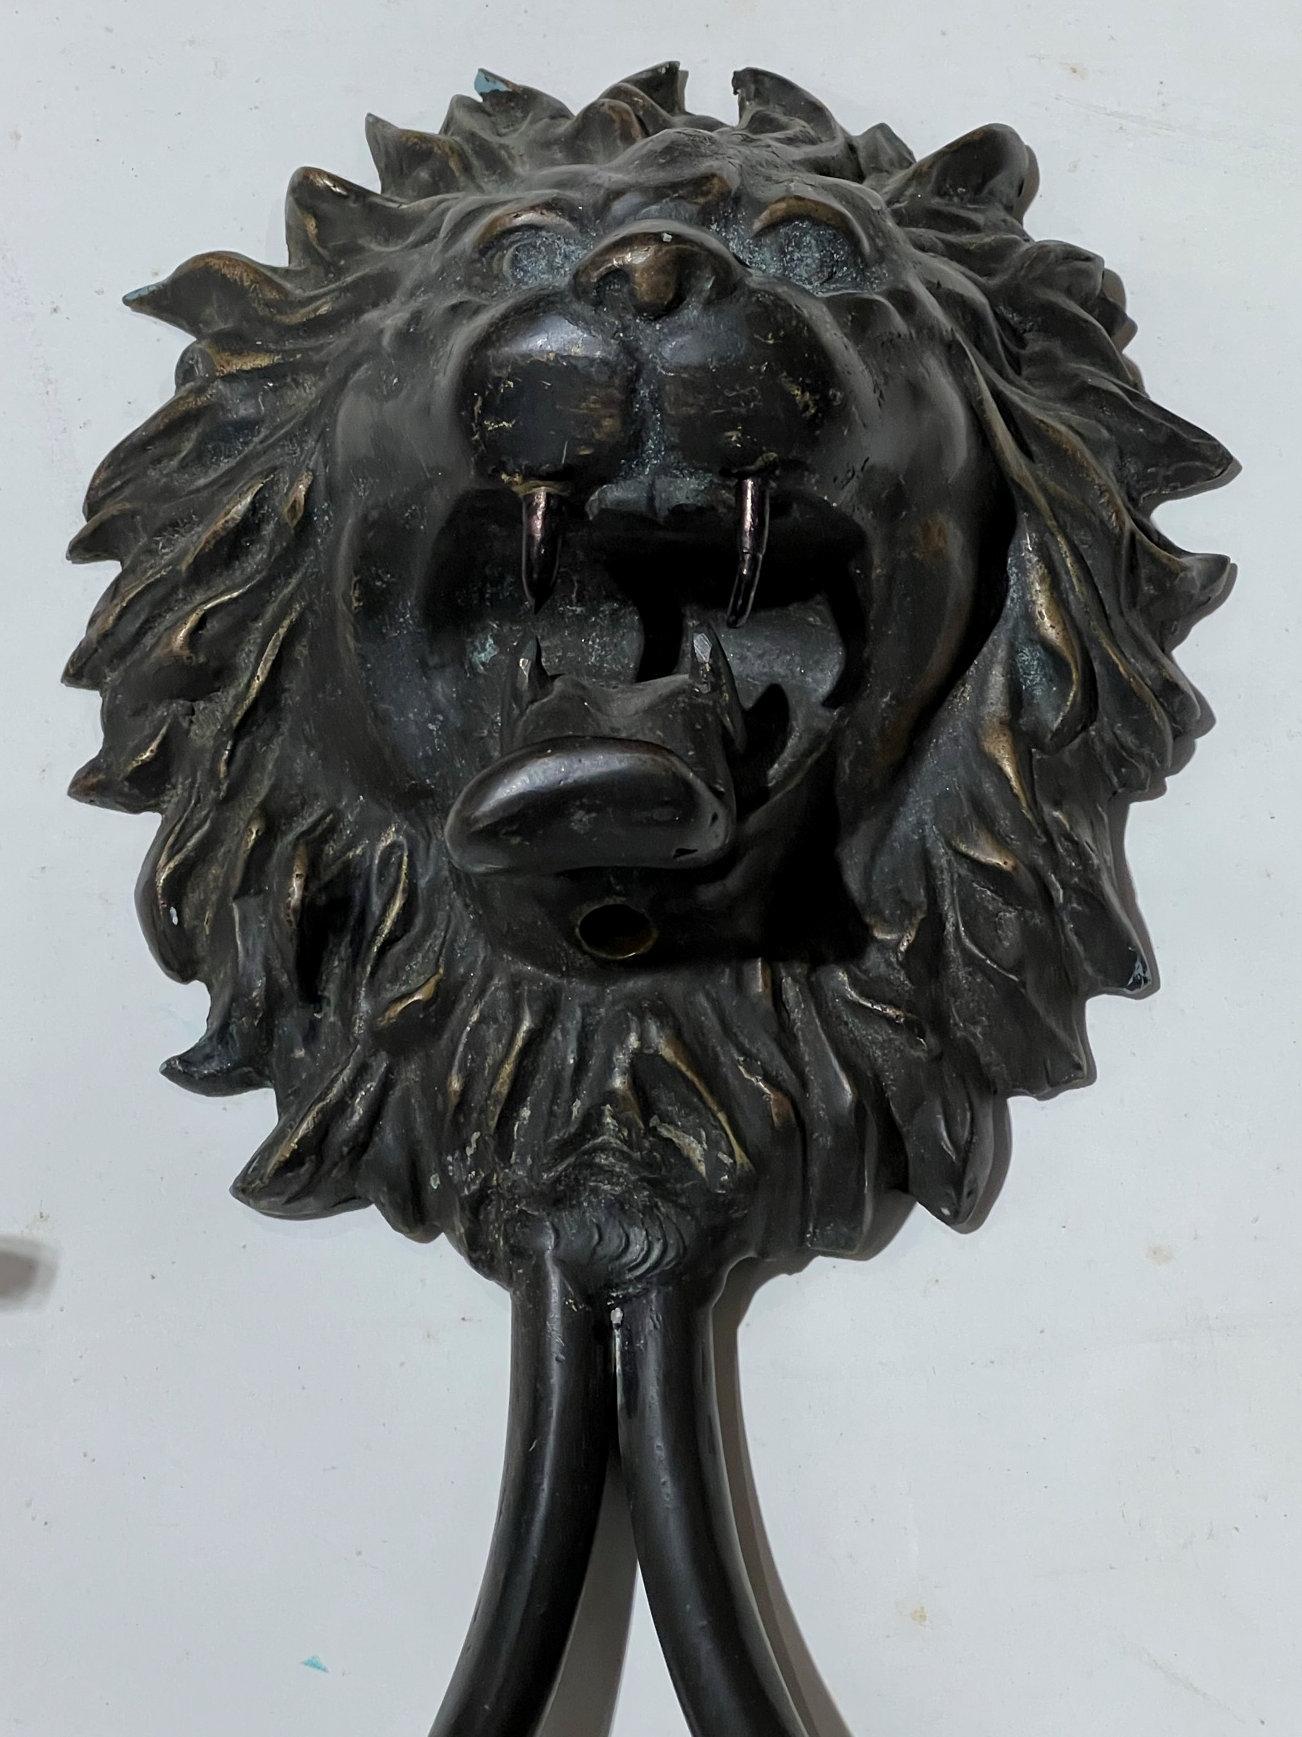 Pair of patinated bronze wall lights in the English Regency style with roaring lion masks and two electrified candle arms.  With modern sockets accommodating candelabra size bulbs.